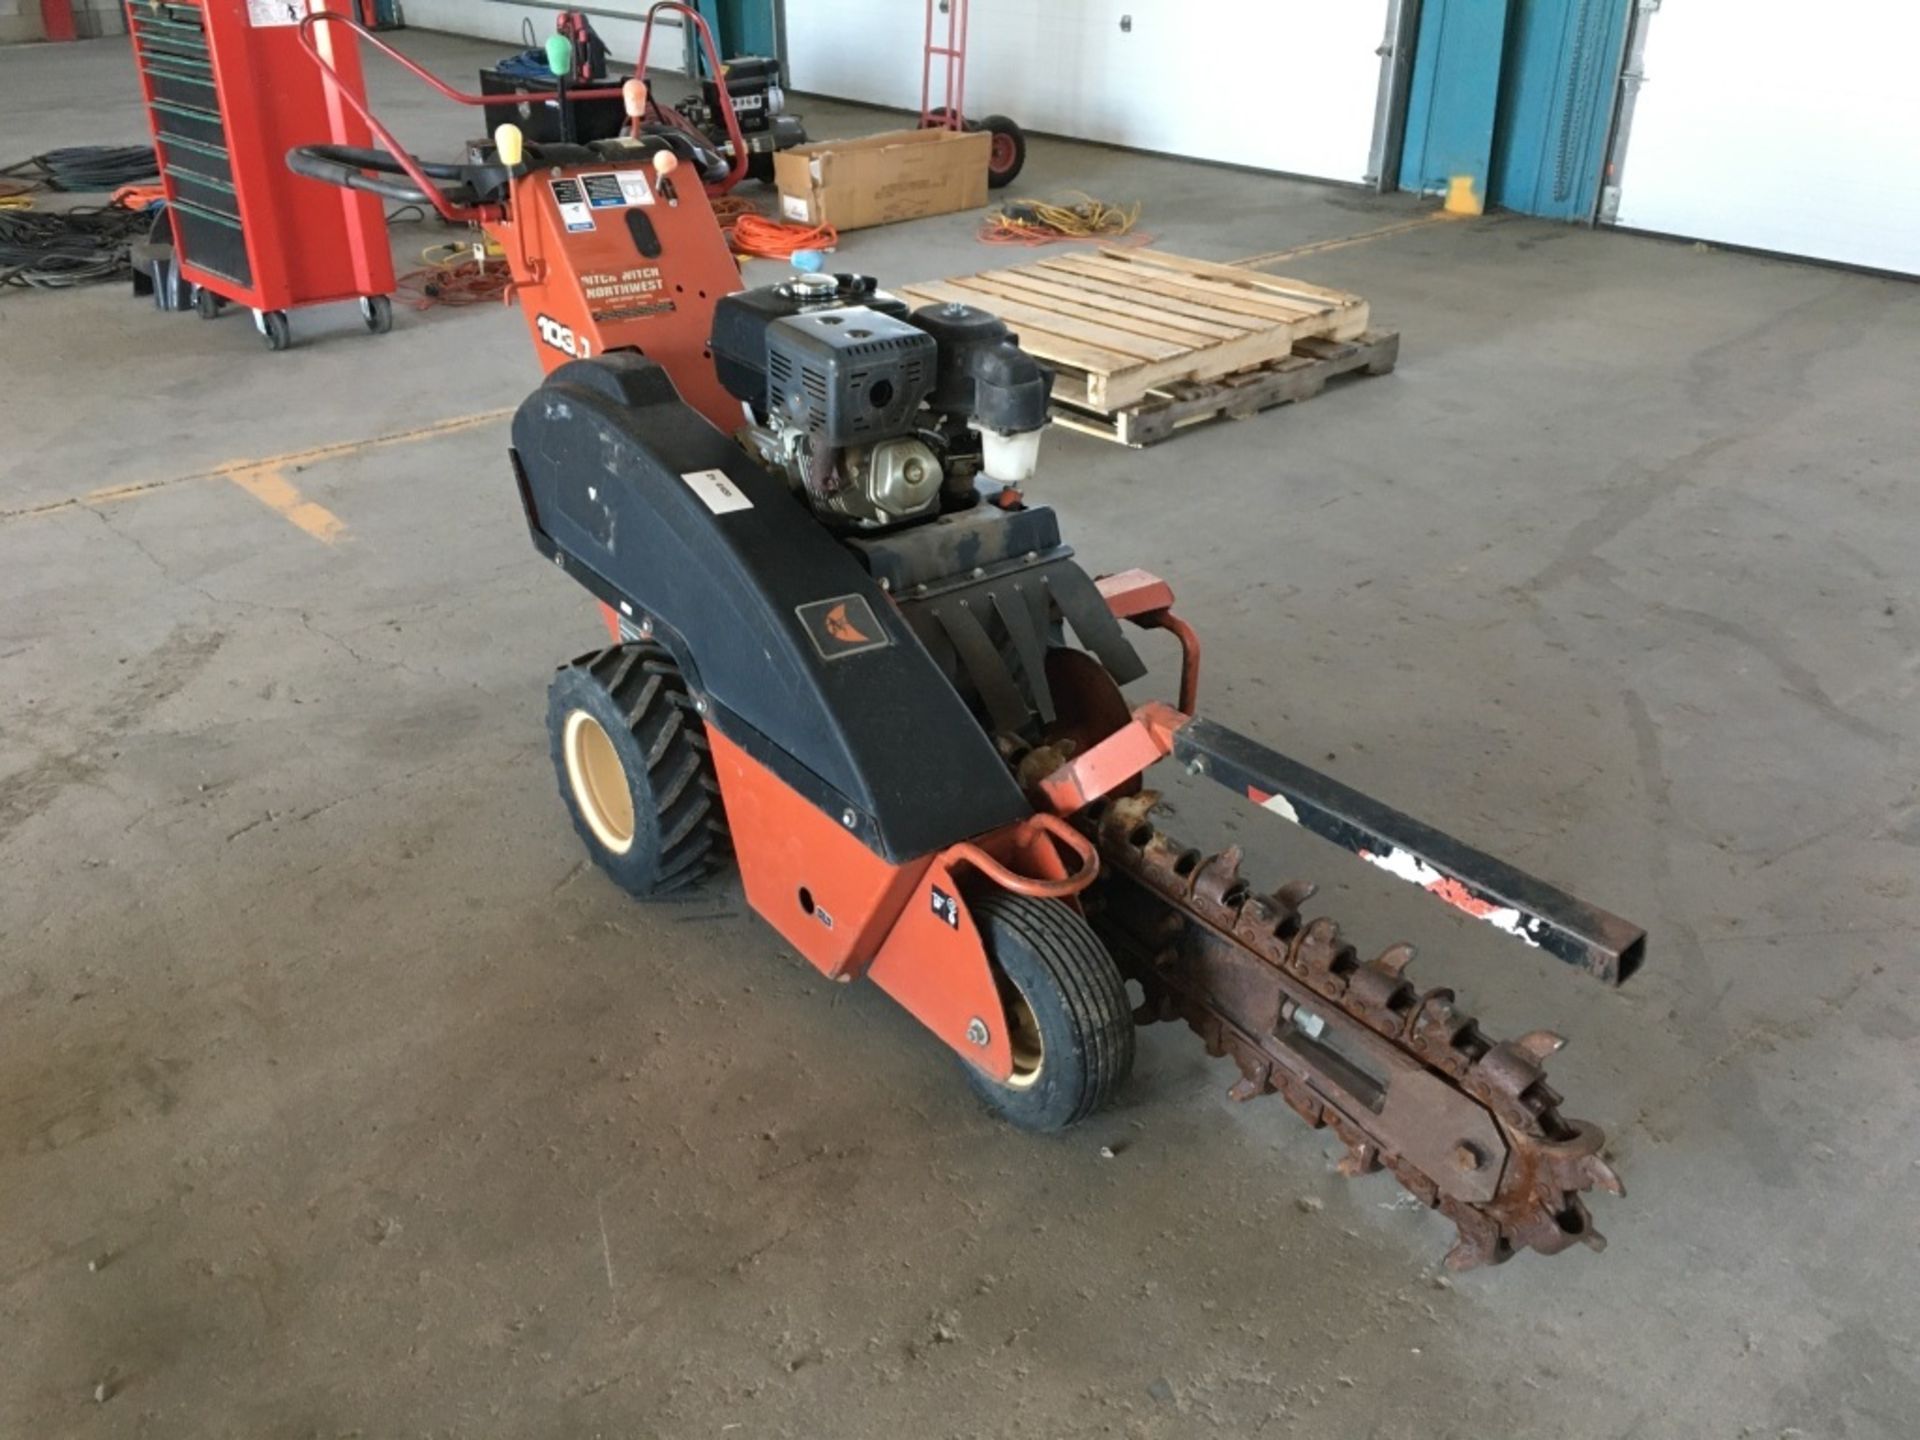 2005 Ditch Witch 1030 Walk Behind Trencher - Image 3 of 19